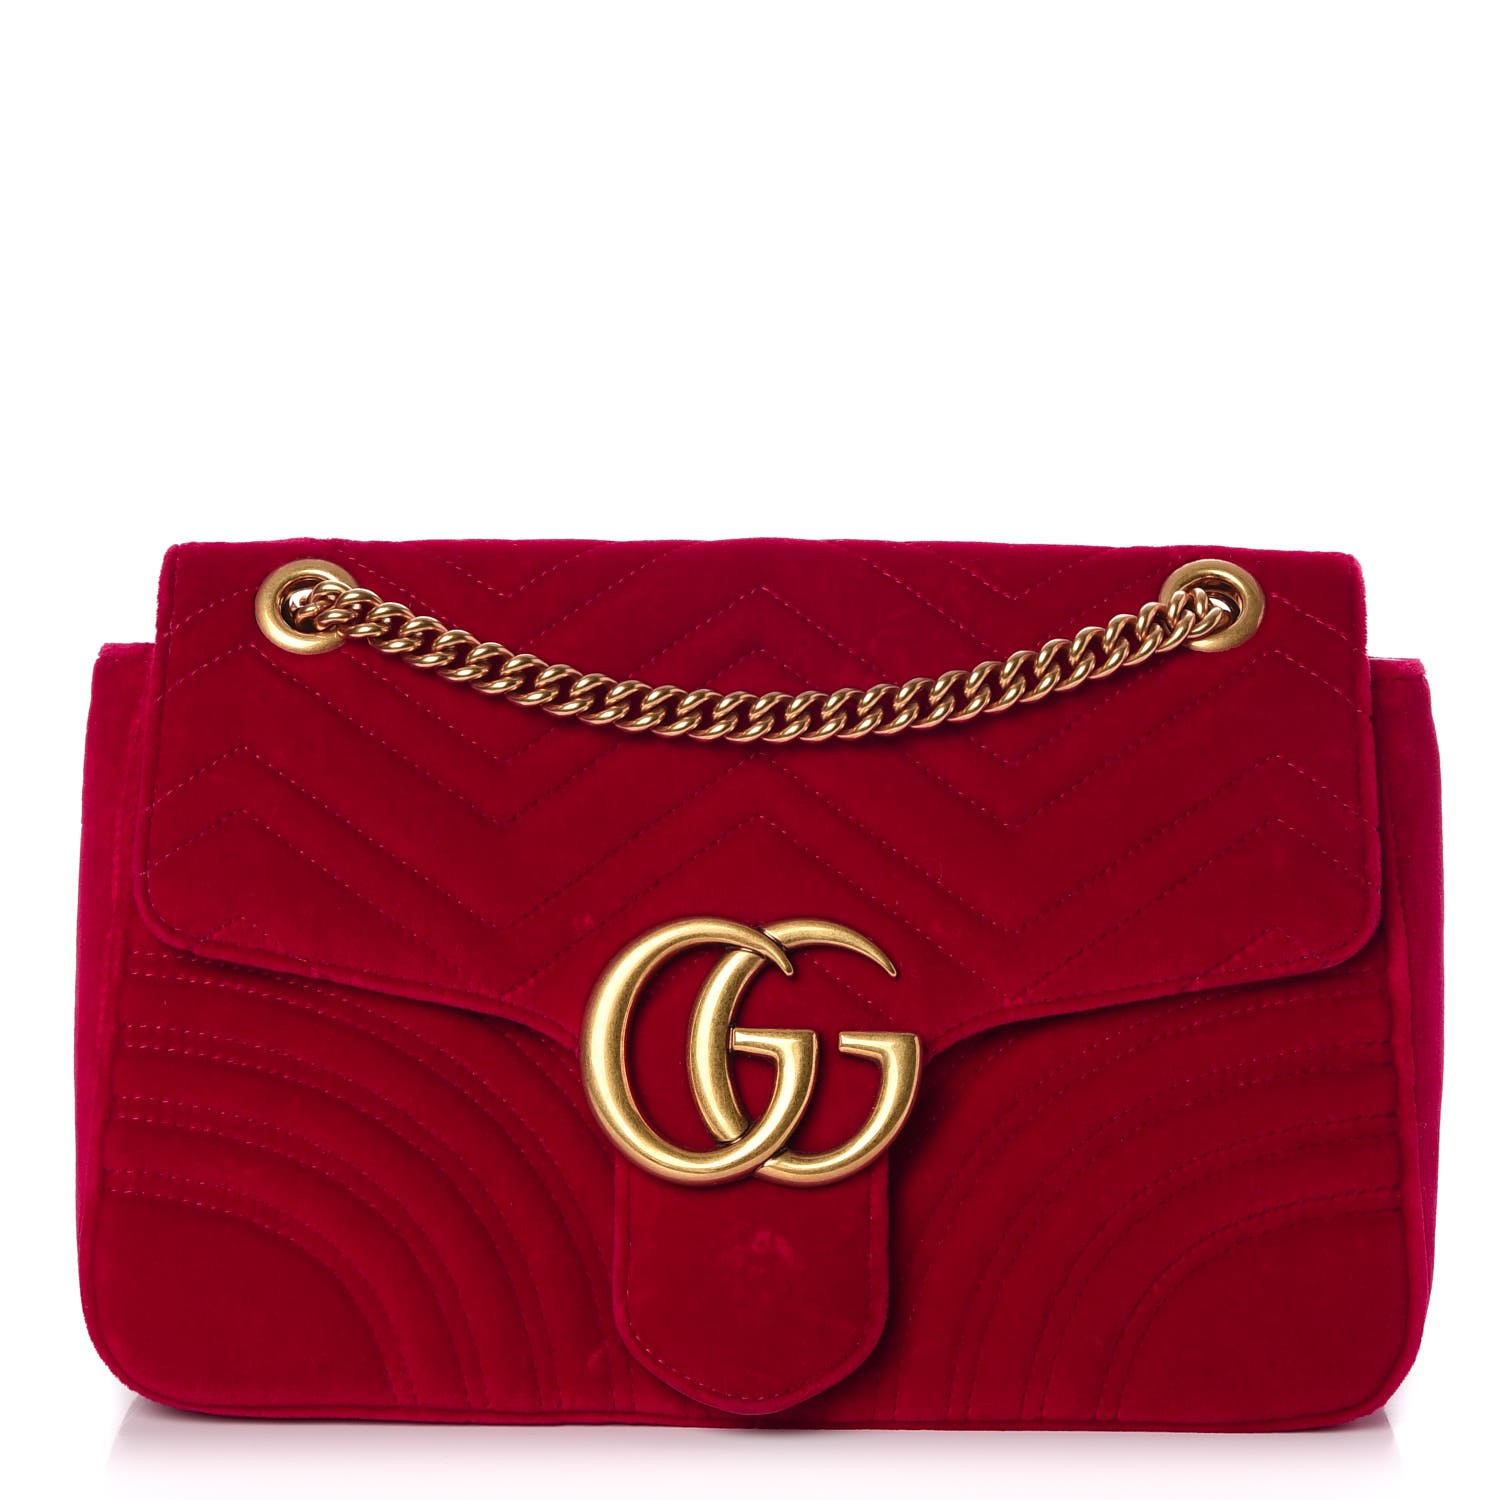 Gucci Marmont Red Flash Sales, 55% OFF | www.emanagreen.com